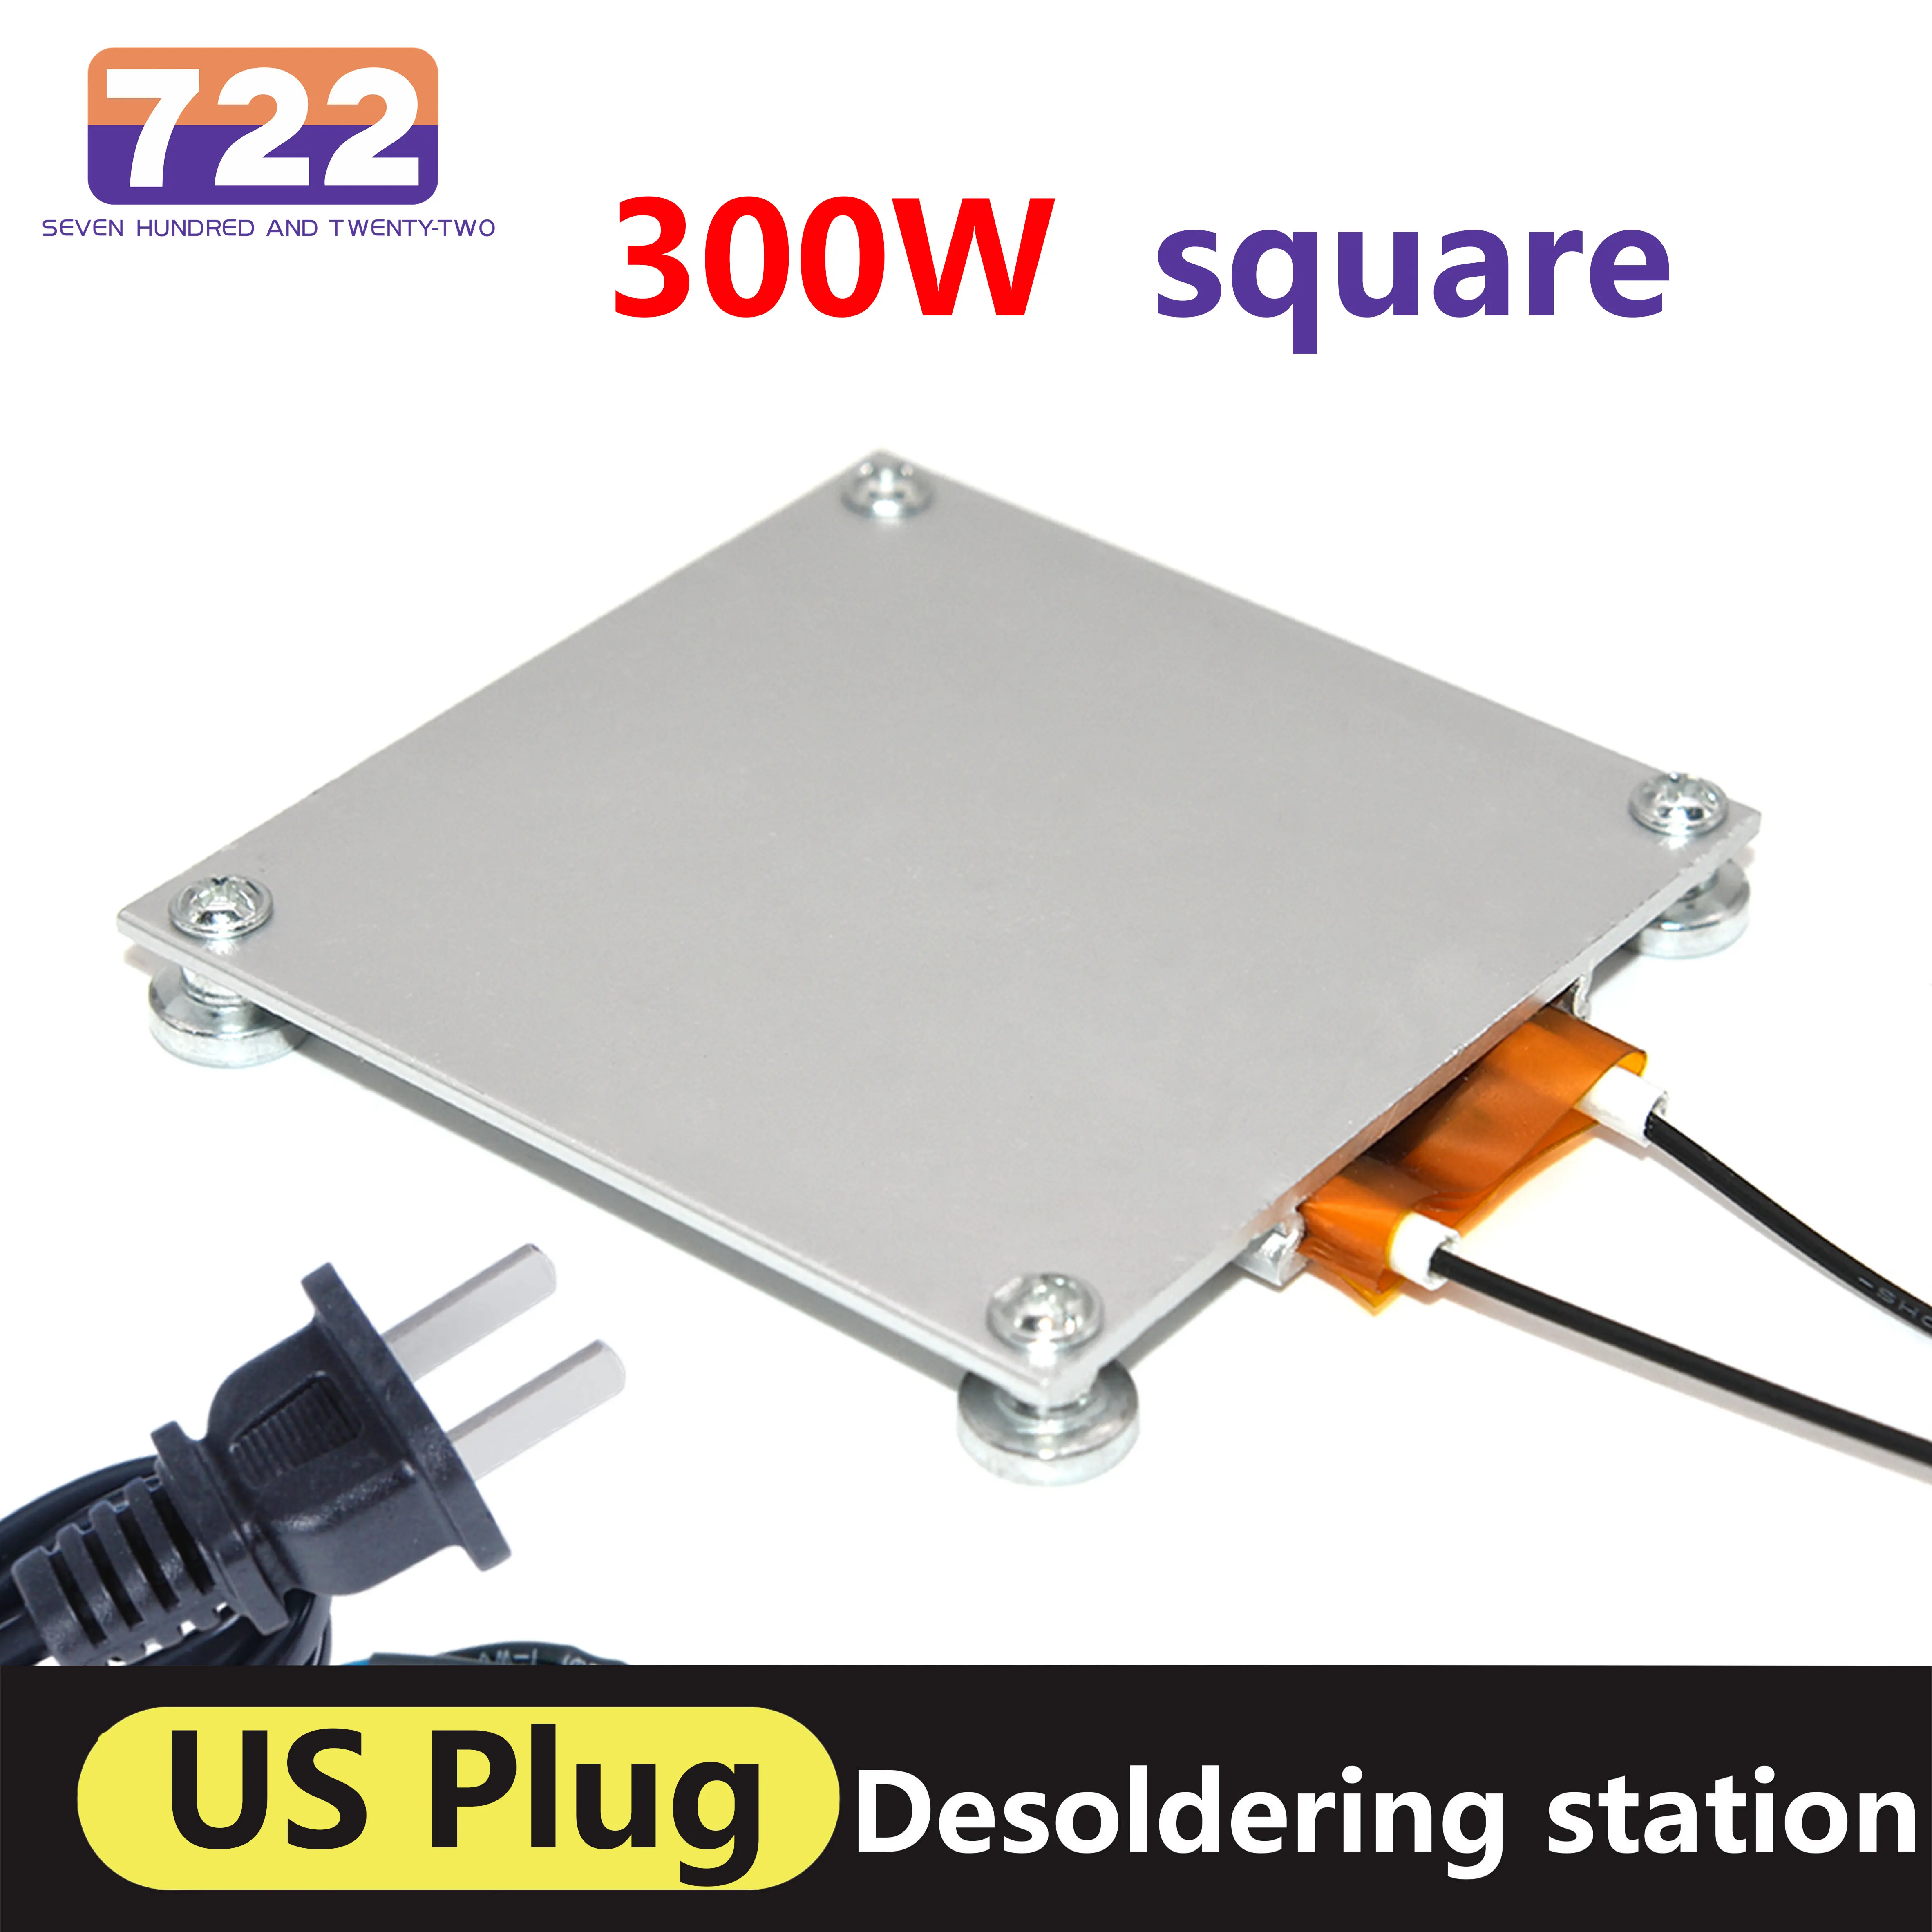 HD 722 70*70mm Rapid heating LED Lamp Remover Fast Heating Welding Solder Station Aluminum Heating Plate 260 Degree 300W US Plug 300w ptc heating soldering plate for lamp beads chips desoldering tools